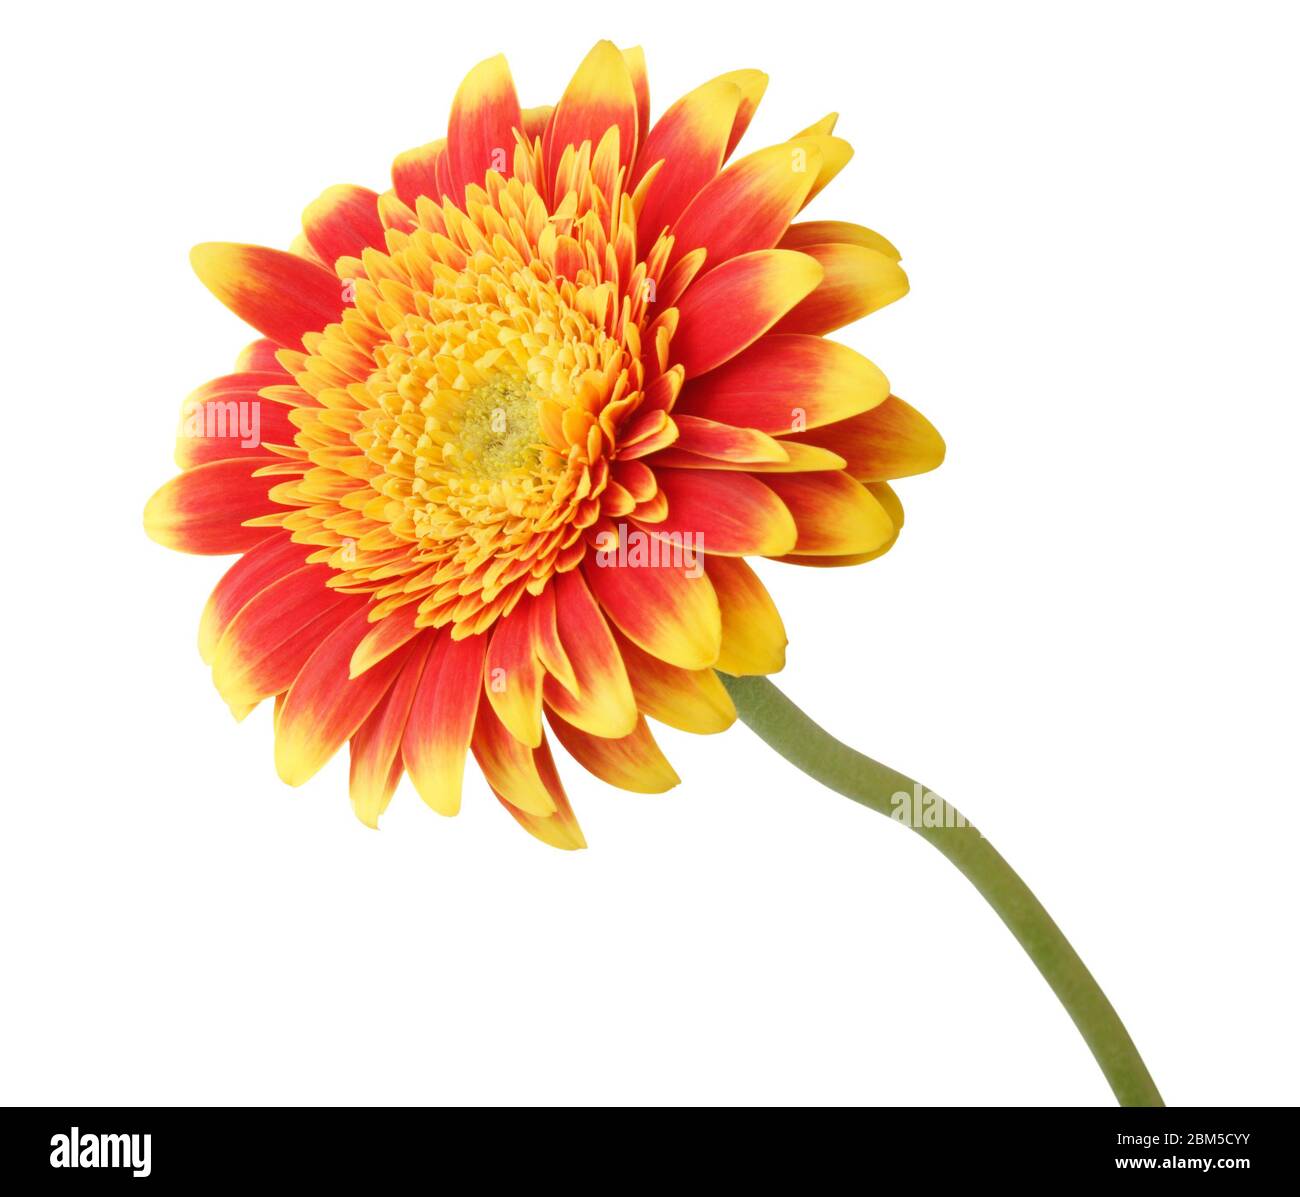 Beautiful Gerbera (Daisy) in yellow and red color, isolated on white background. Germany Stock Photo